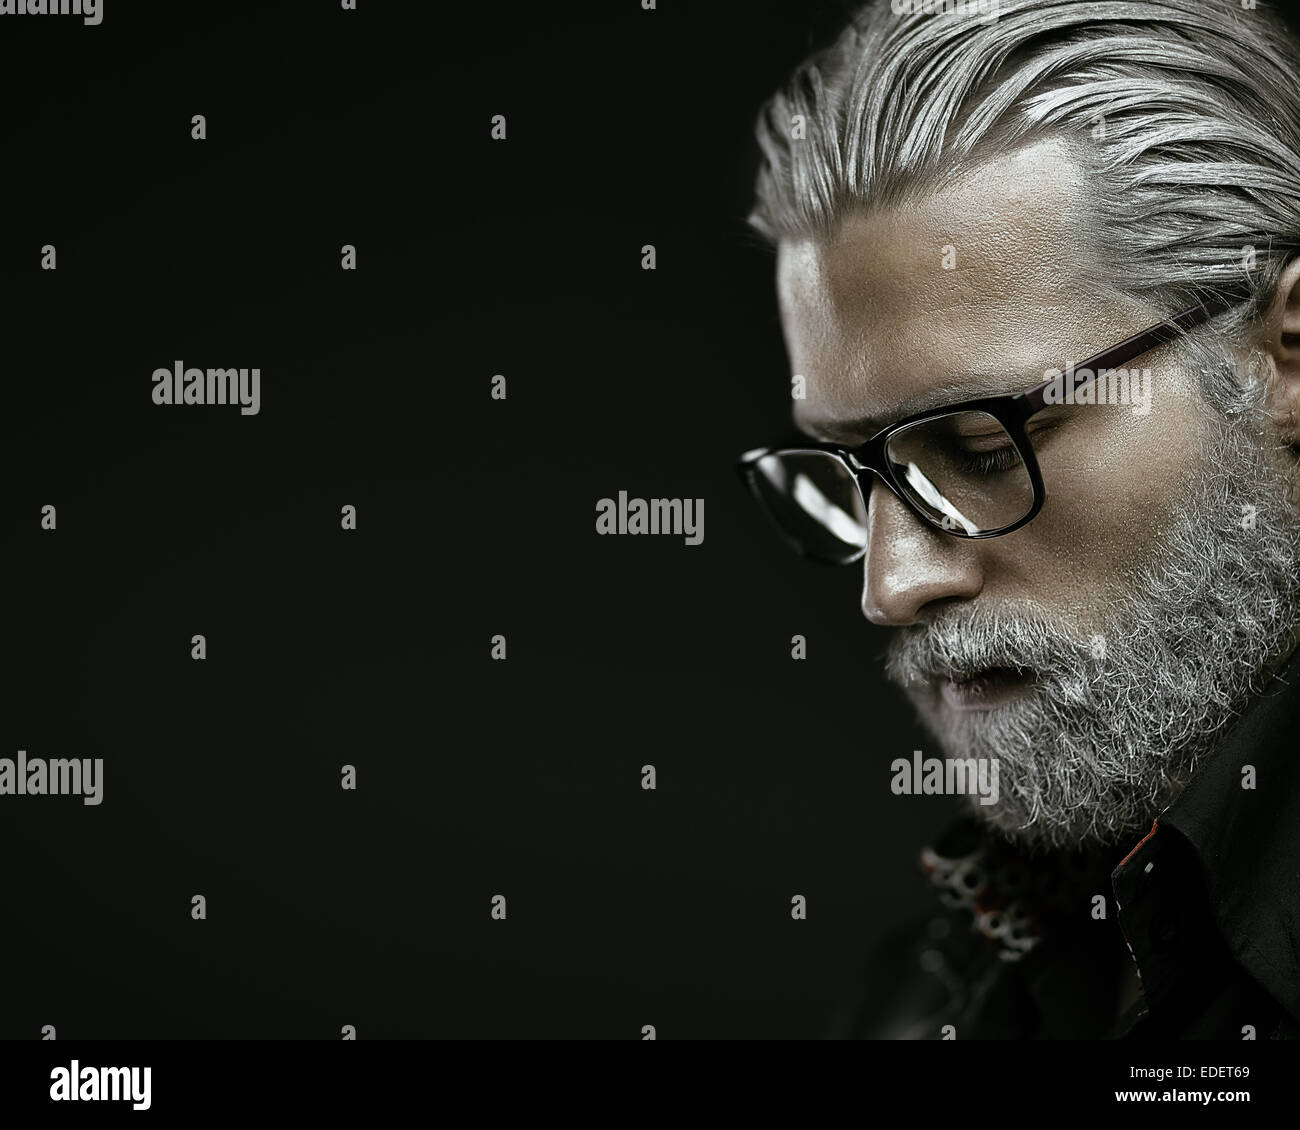 Artistic portrait of gray haired man on black background Stock Photo